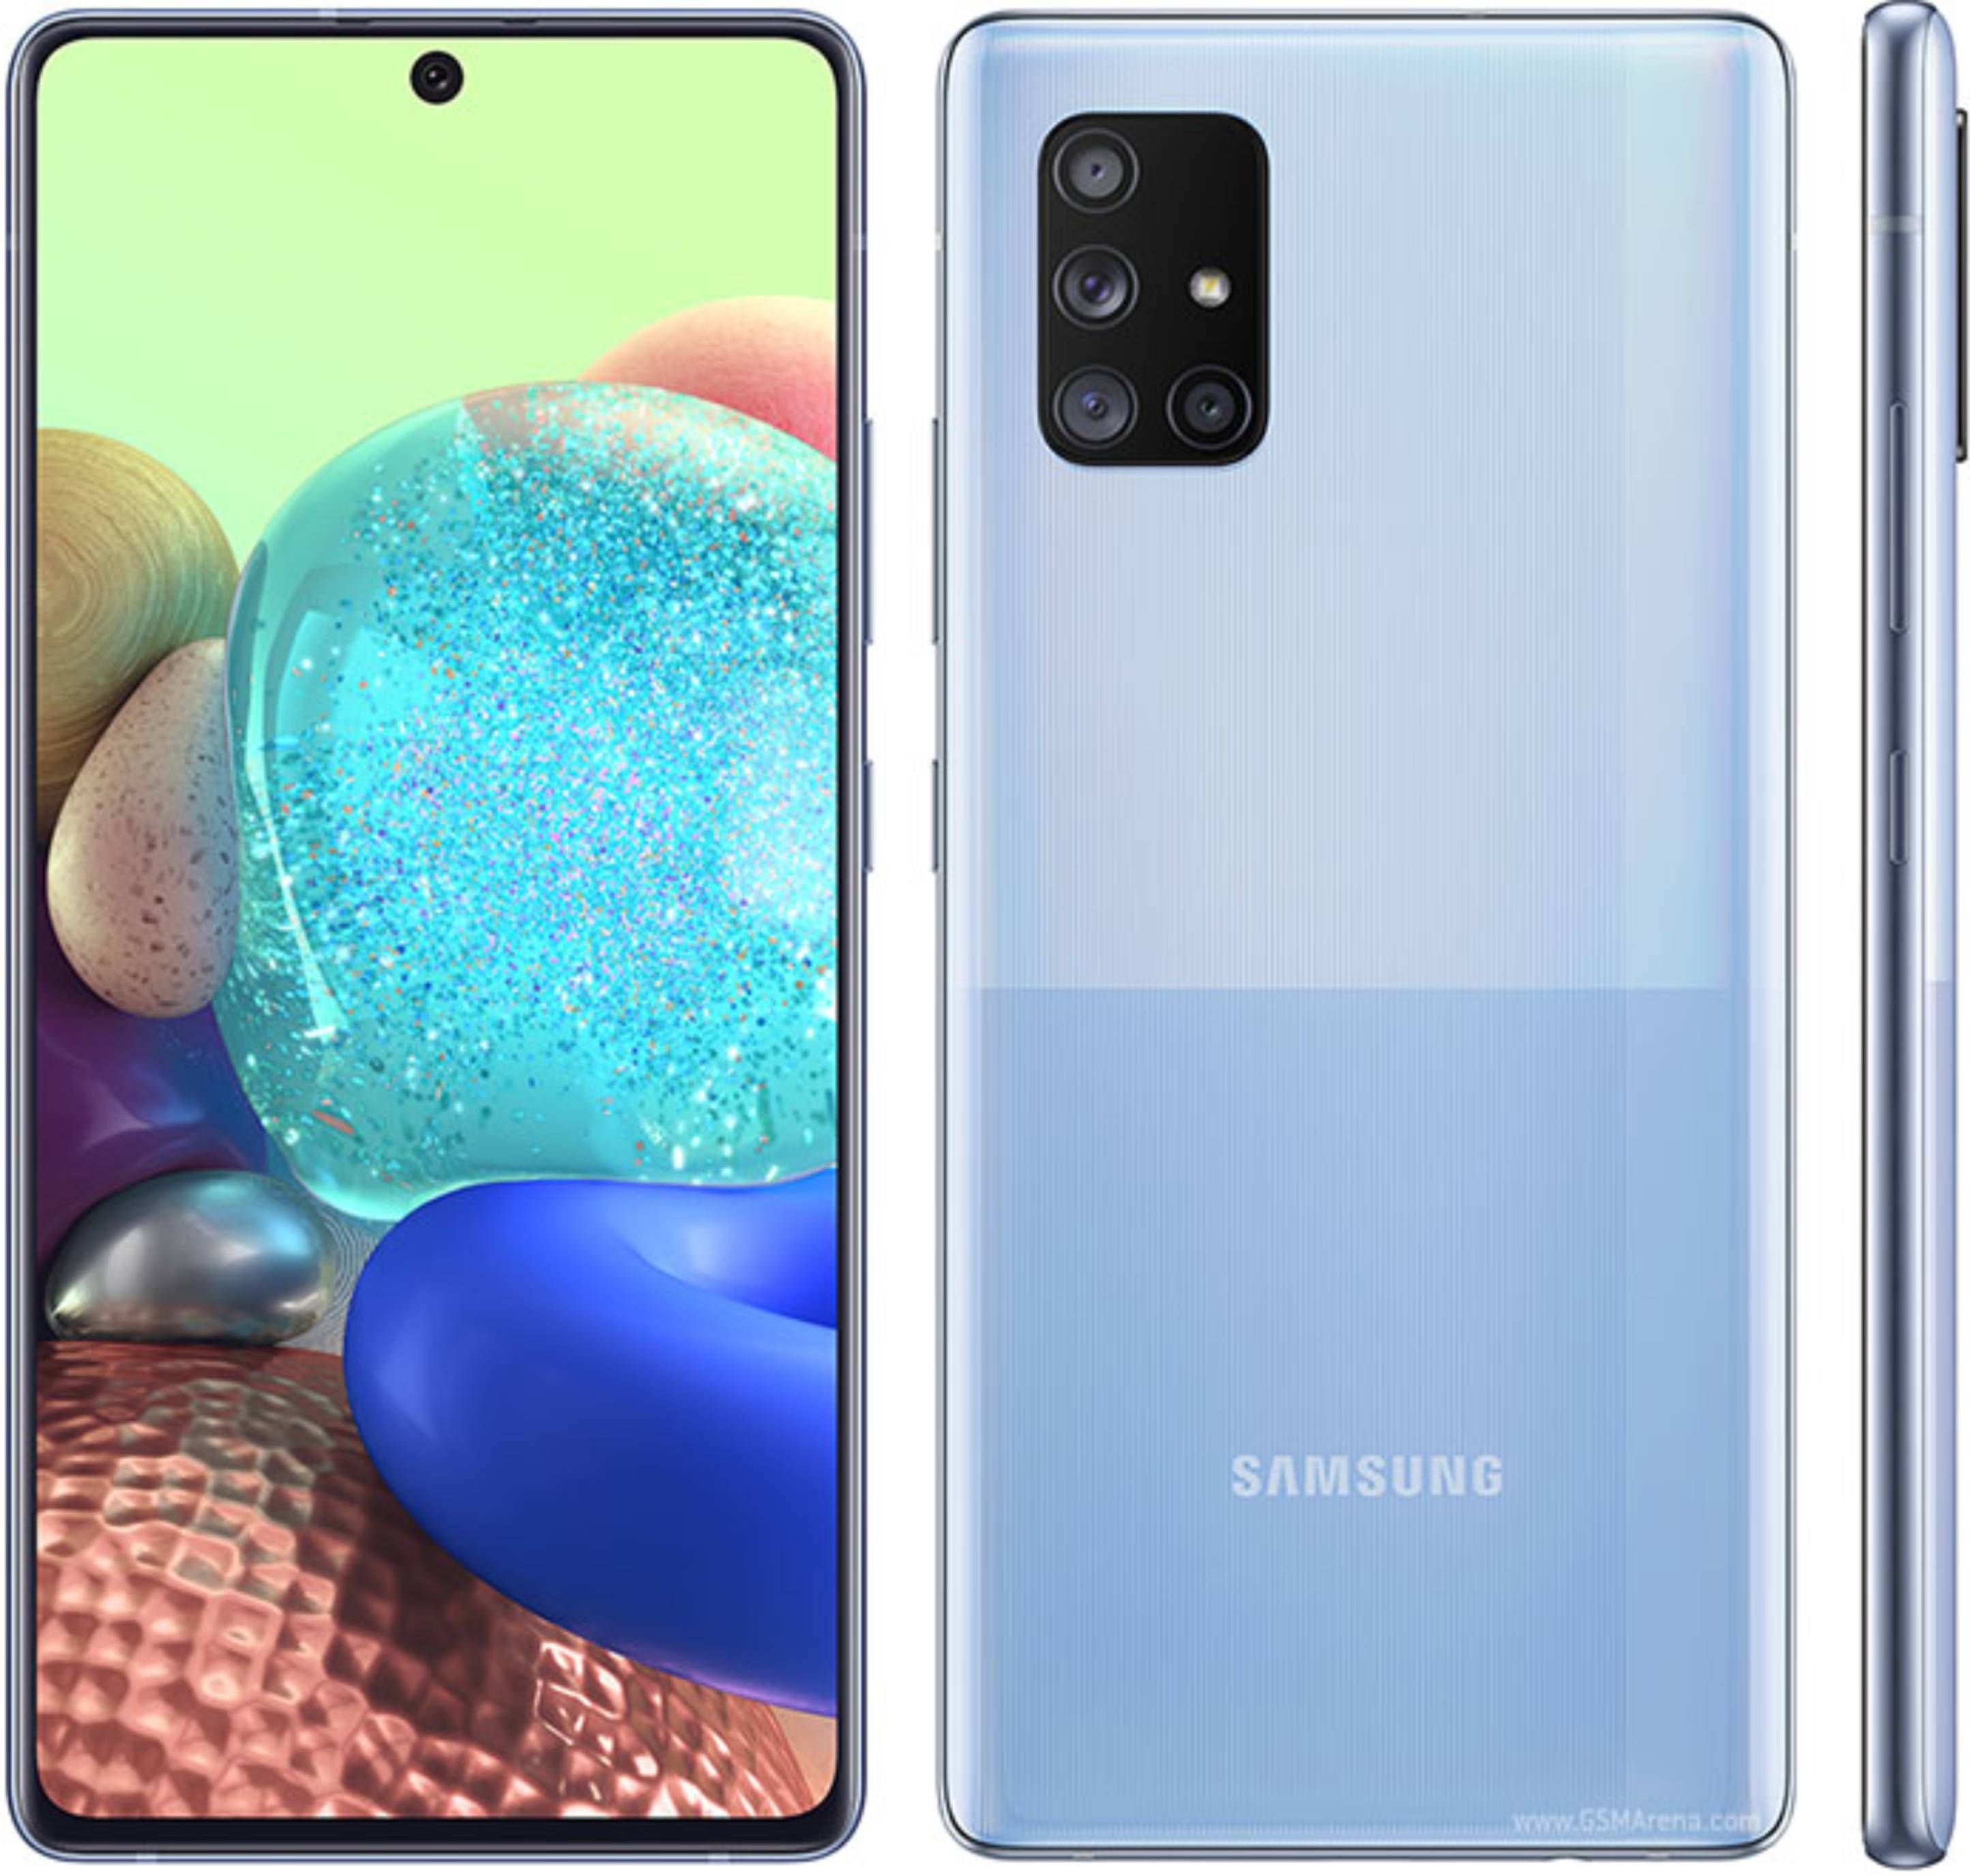 Samsung Galaxy A71 5G Specifications and Price in Kenya